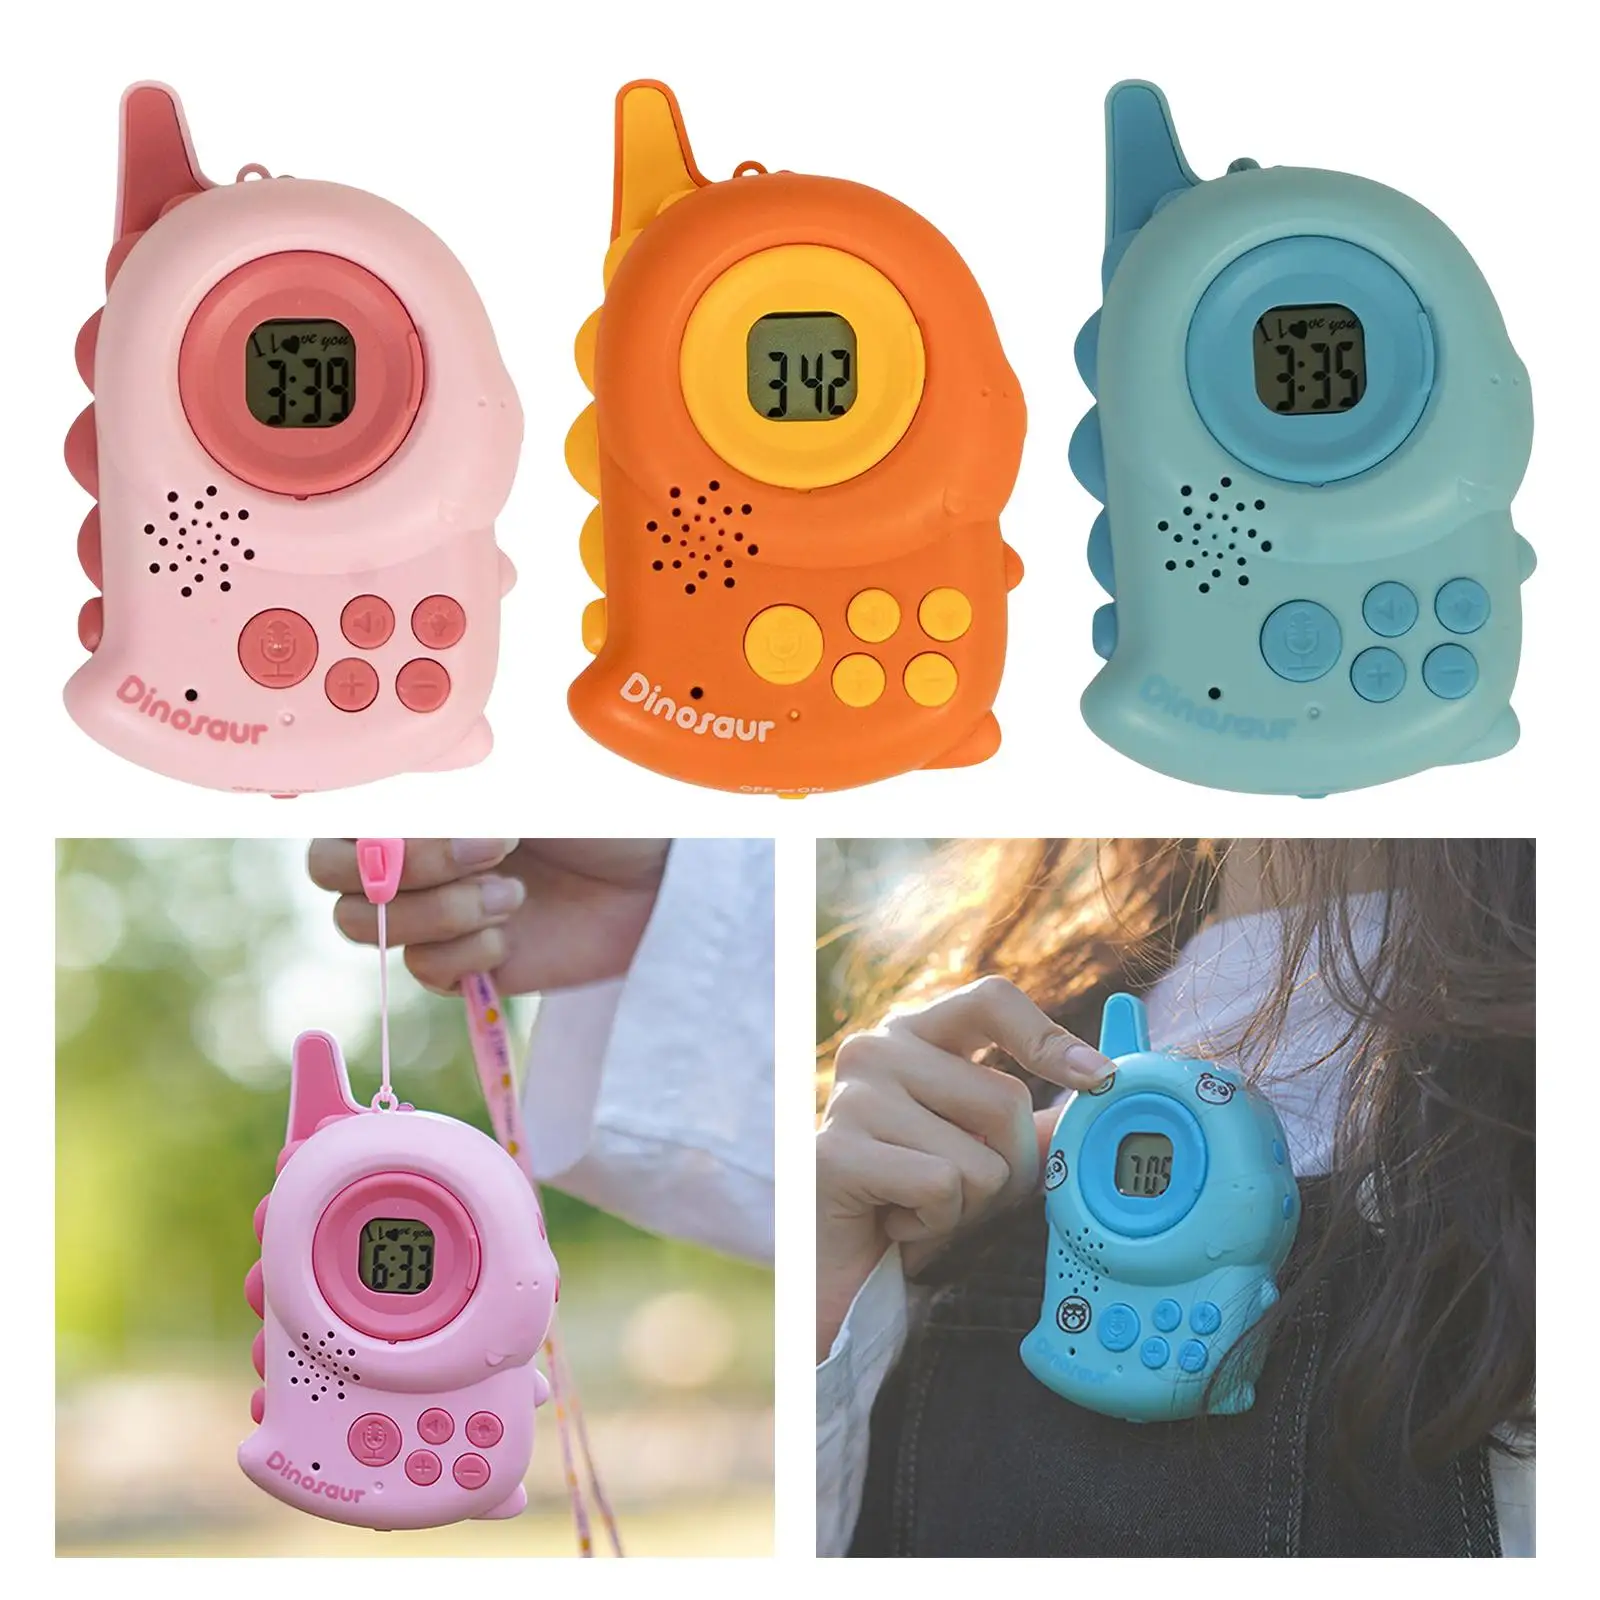 Handheld Walkie Talkies for Kids Indoor Outdoor Toys Outdoor Camping Games Long Range for Summer Outside Camping Birthday Gifts